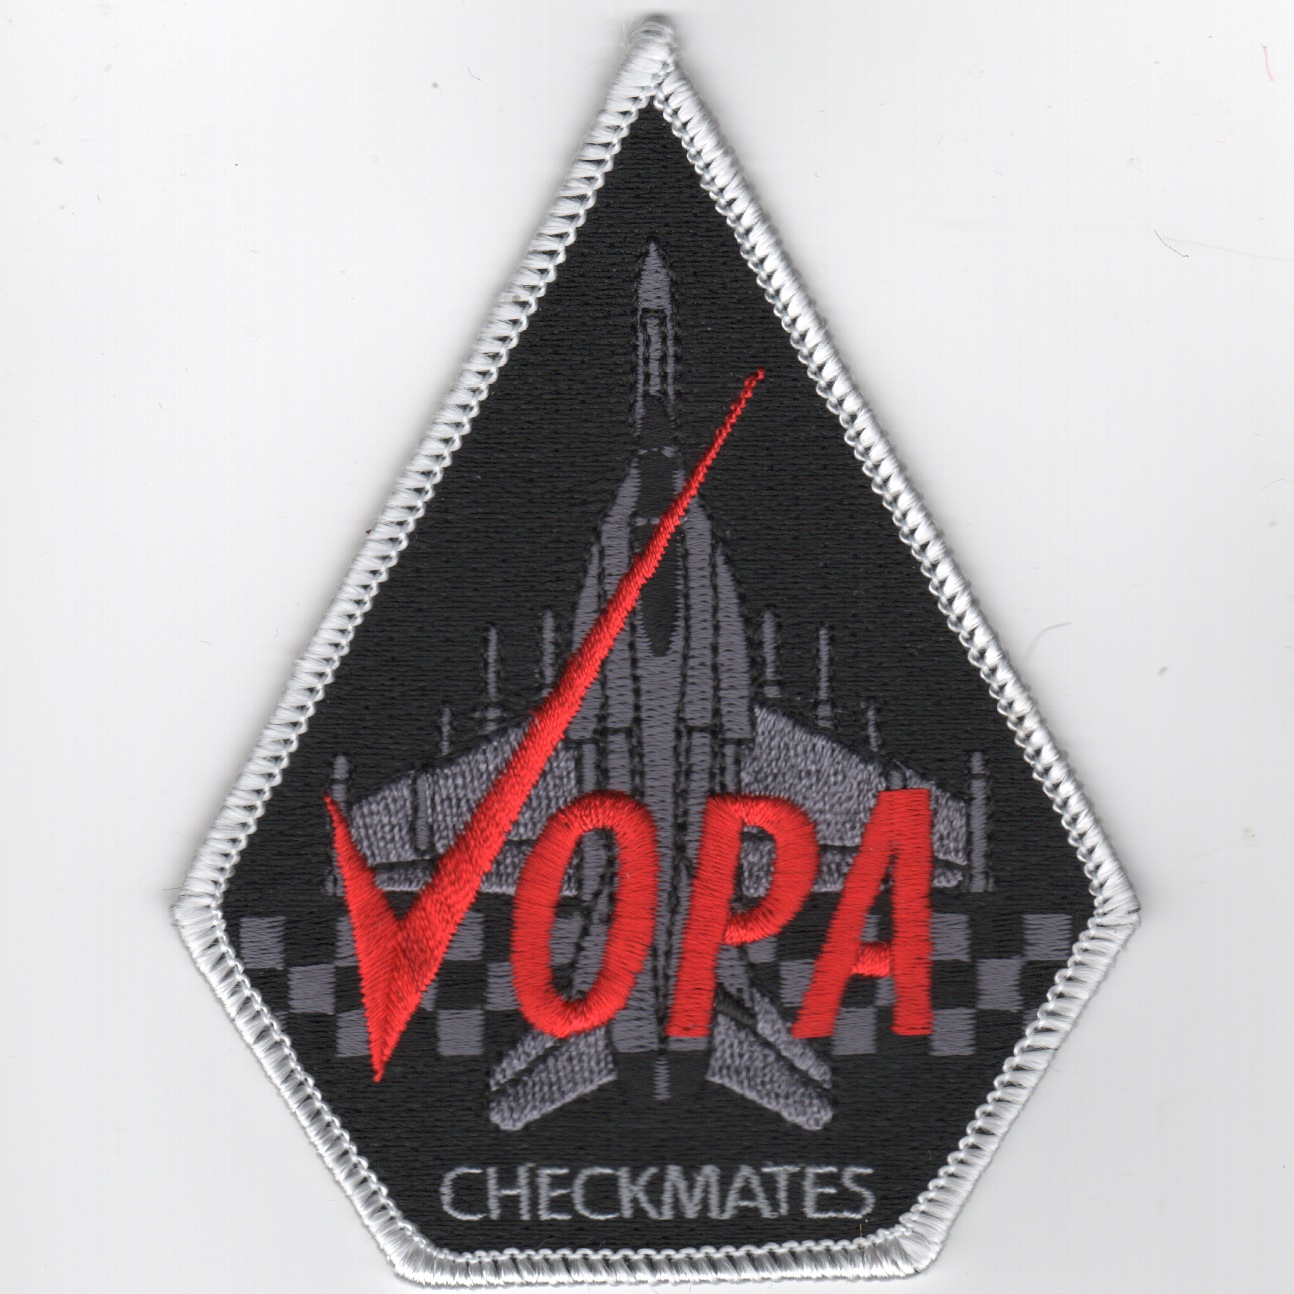 VFA-211 FIGHTING CHECKMATES NWU SHOULDER PATCH 